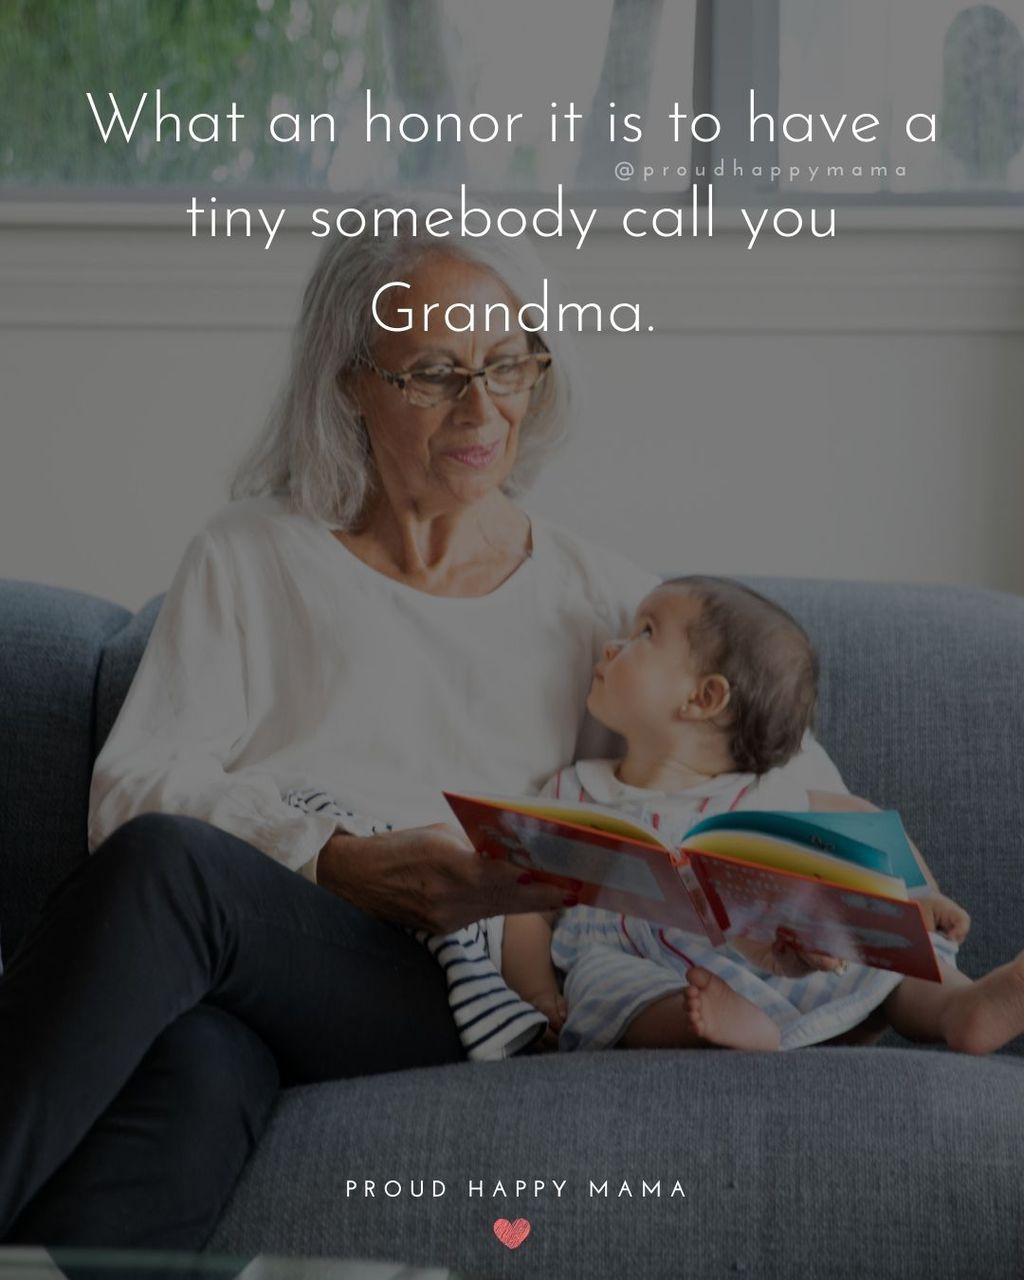 Quotes for Grandchildren - What an honor it is to have a tiny somebody call you Grandma.